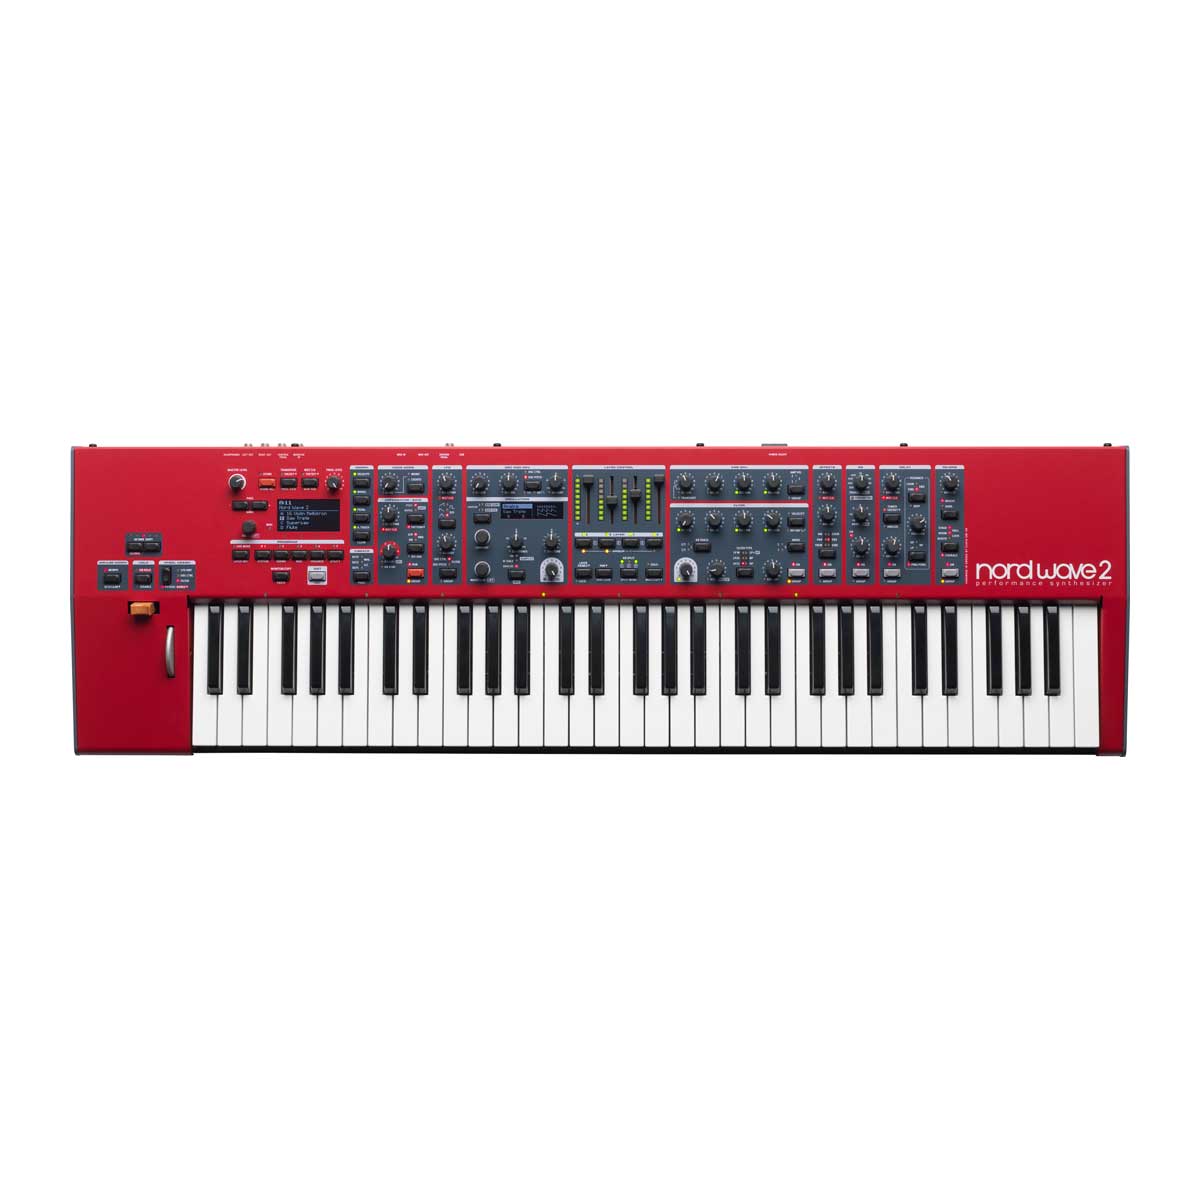 Nord Wave 2 4-part performance synthesizer